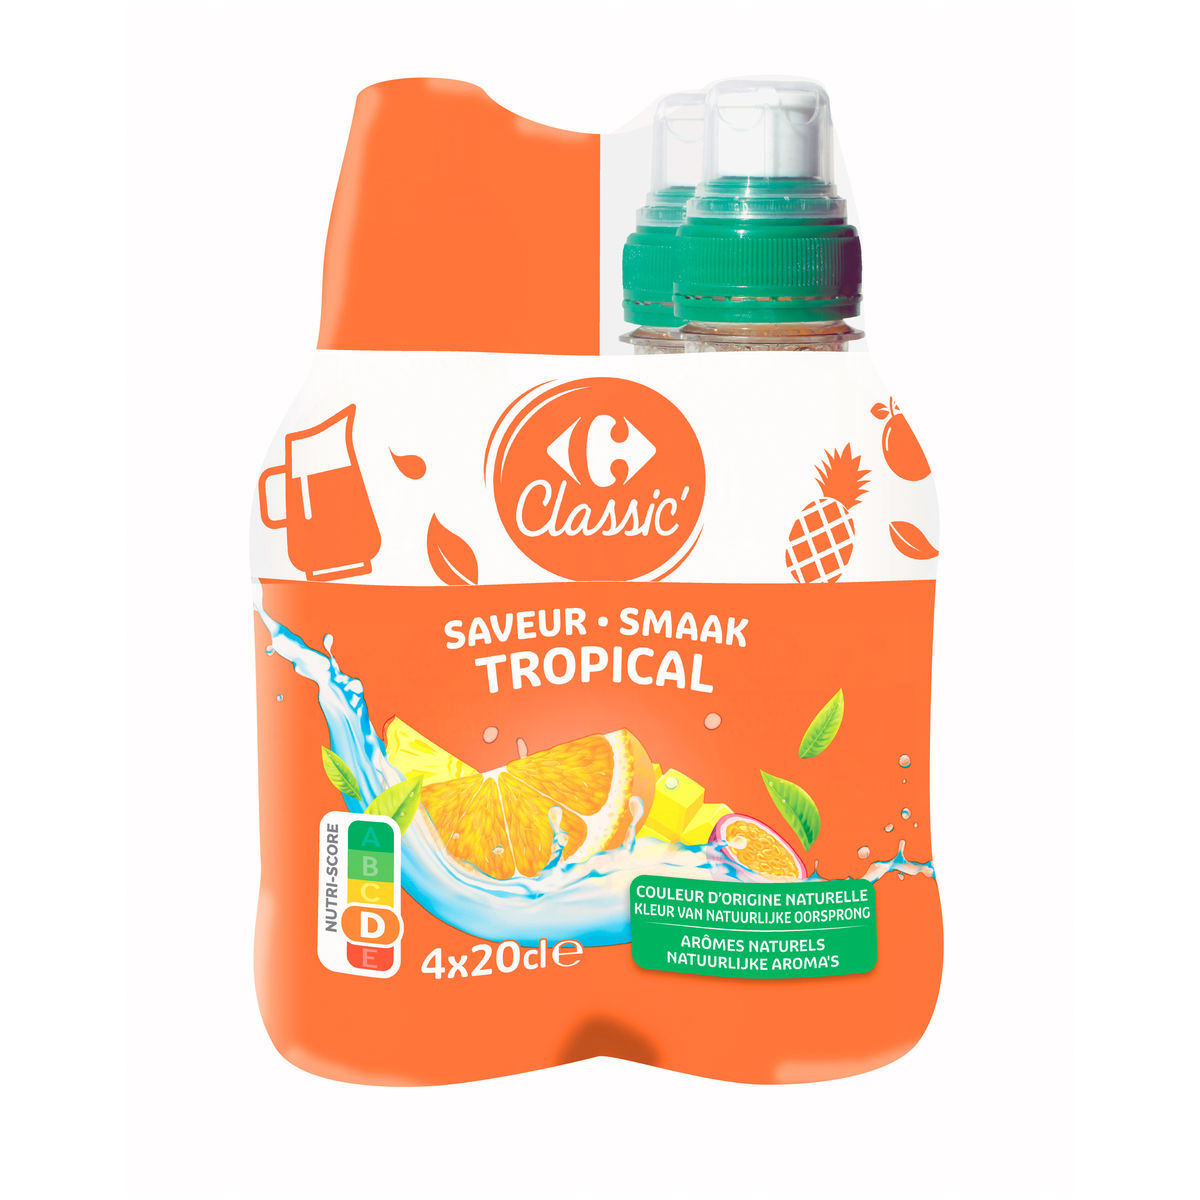 Carrefour Classic' Smaak Tropical 4 x 20 cl